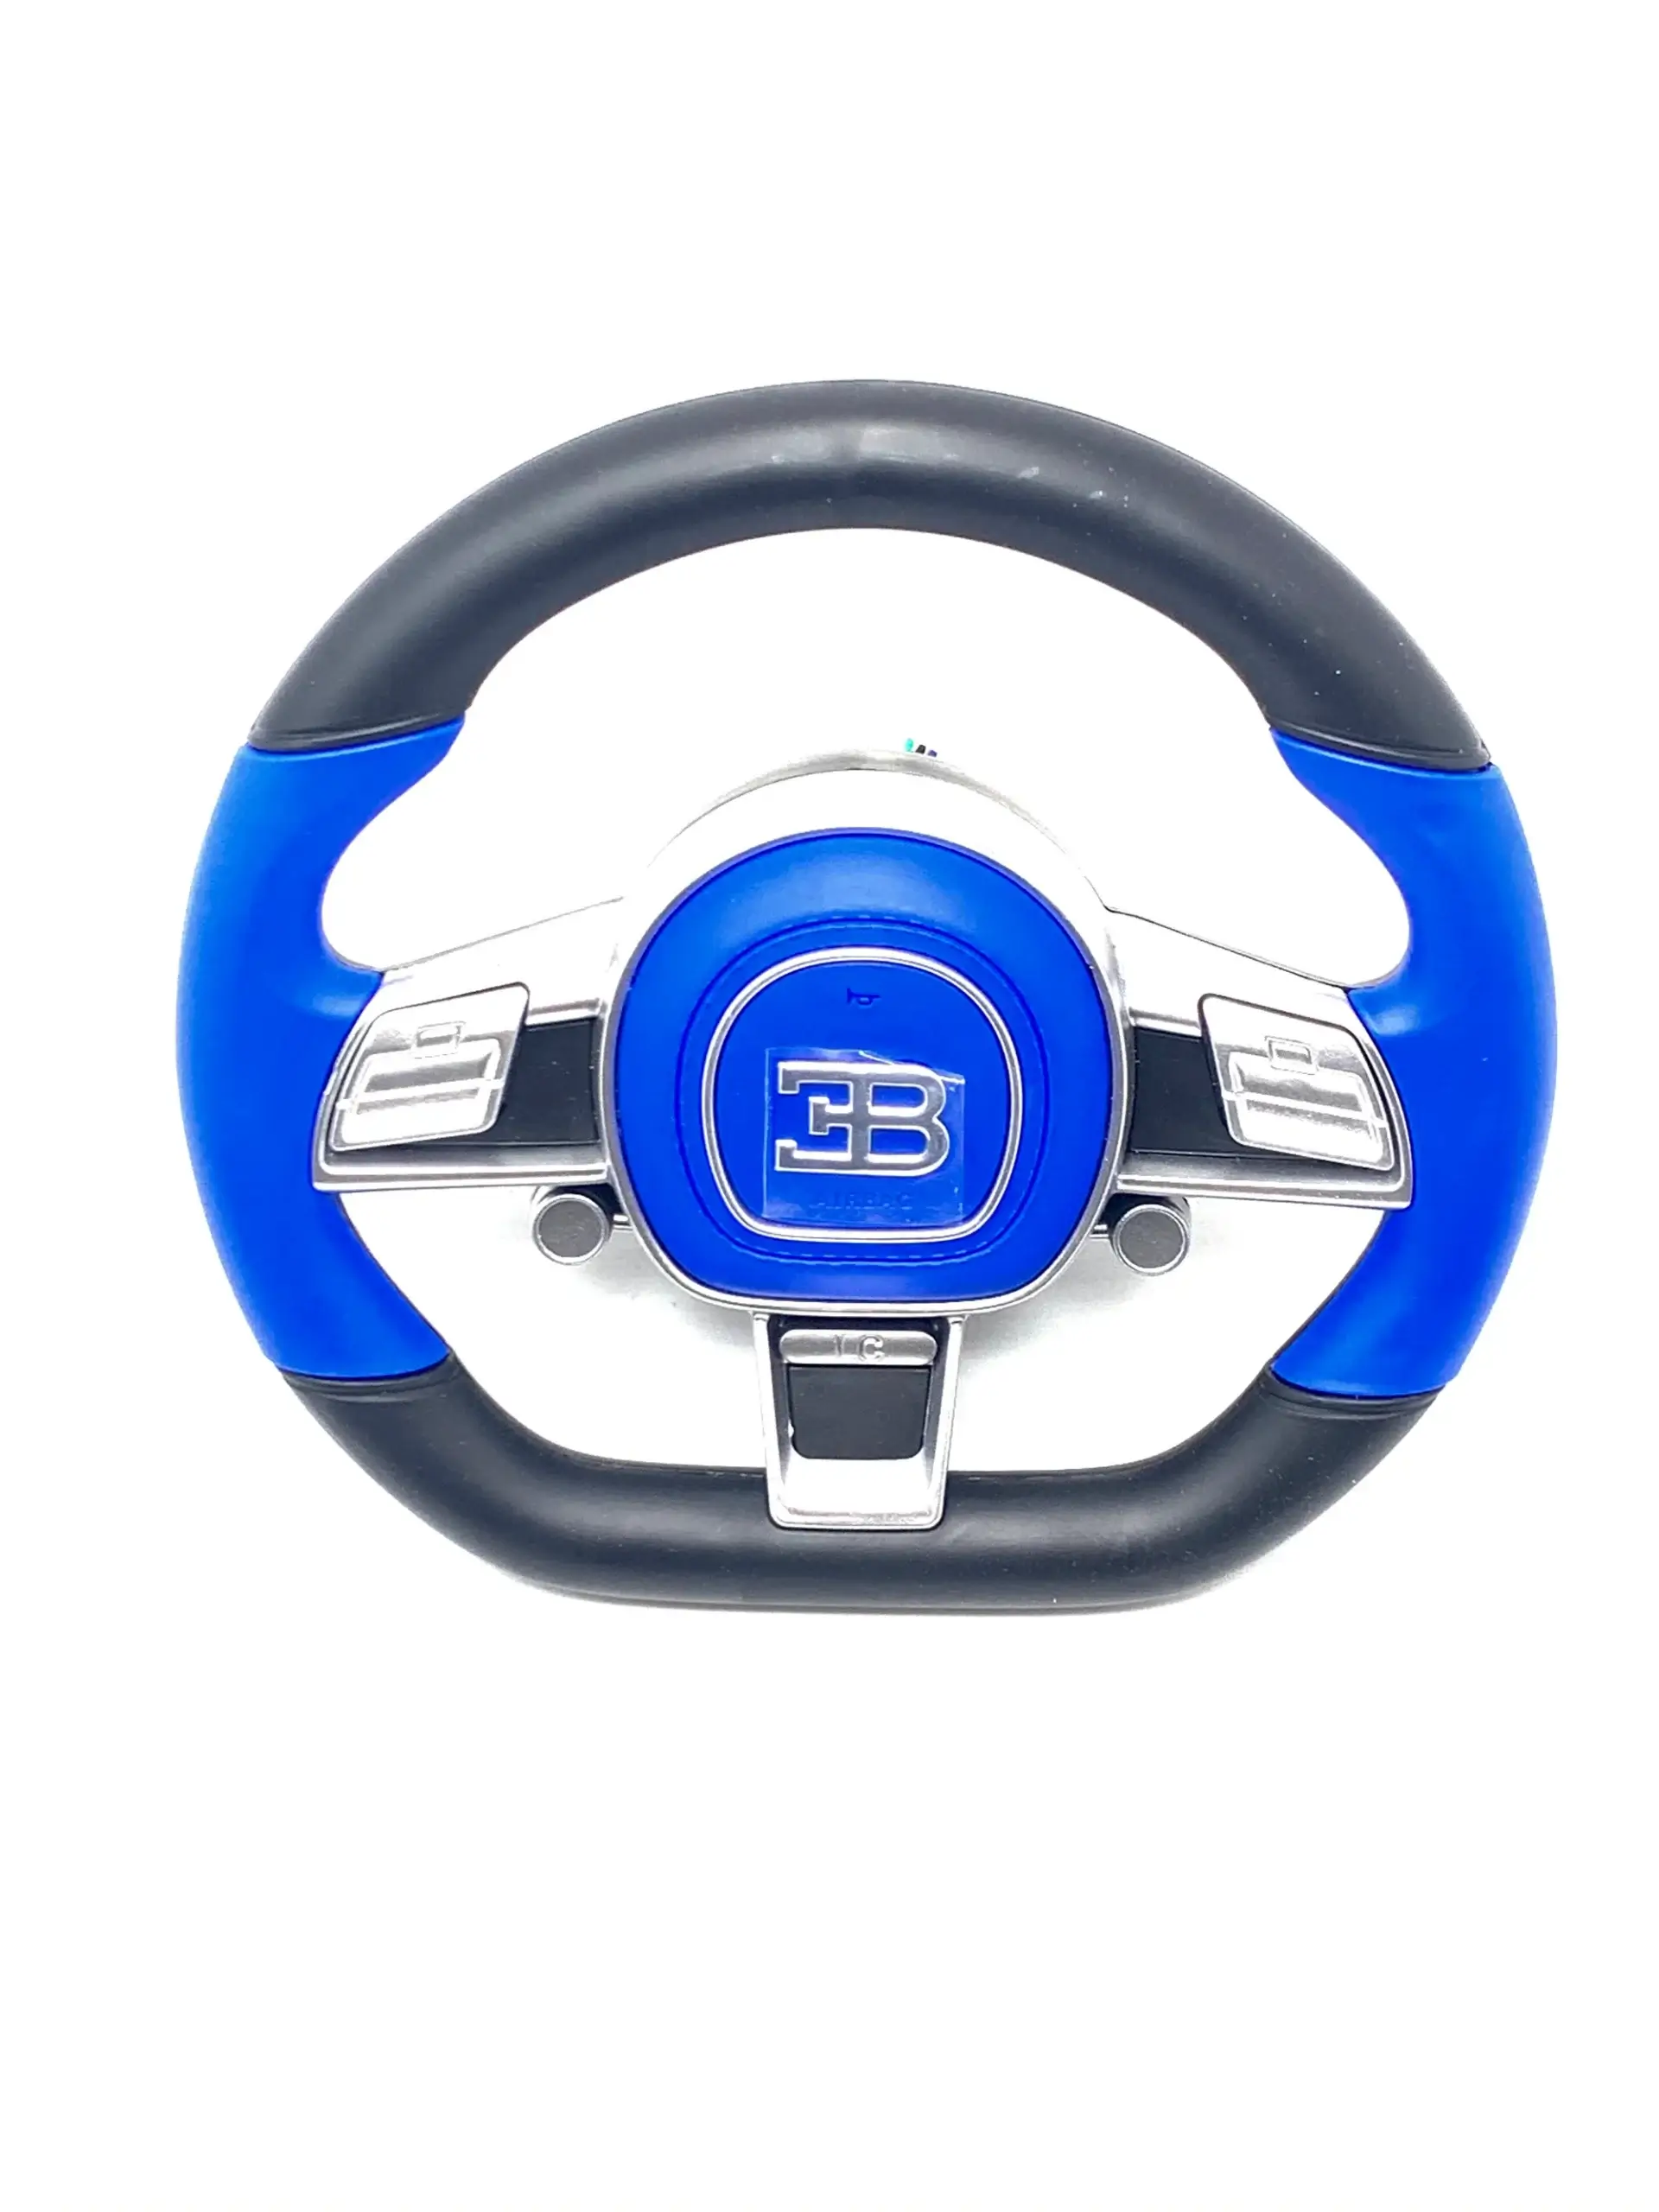 “Enhance Your Bugatti Divo with a Stylish Blue Steering Wheel – 12v Compatible”